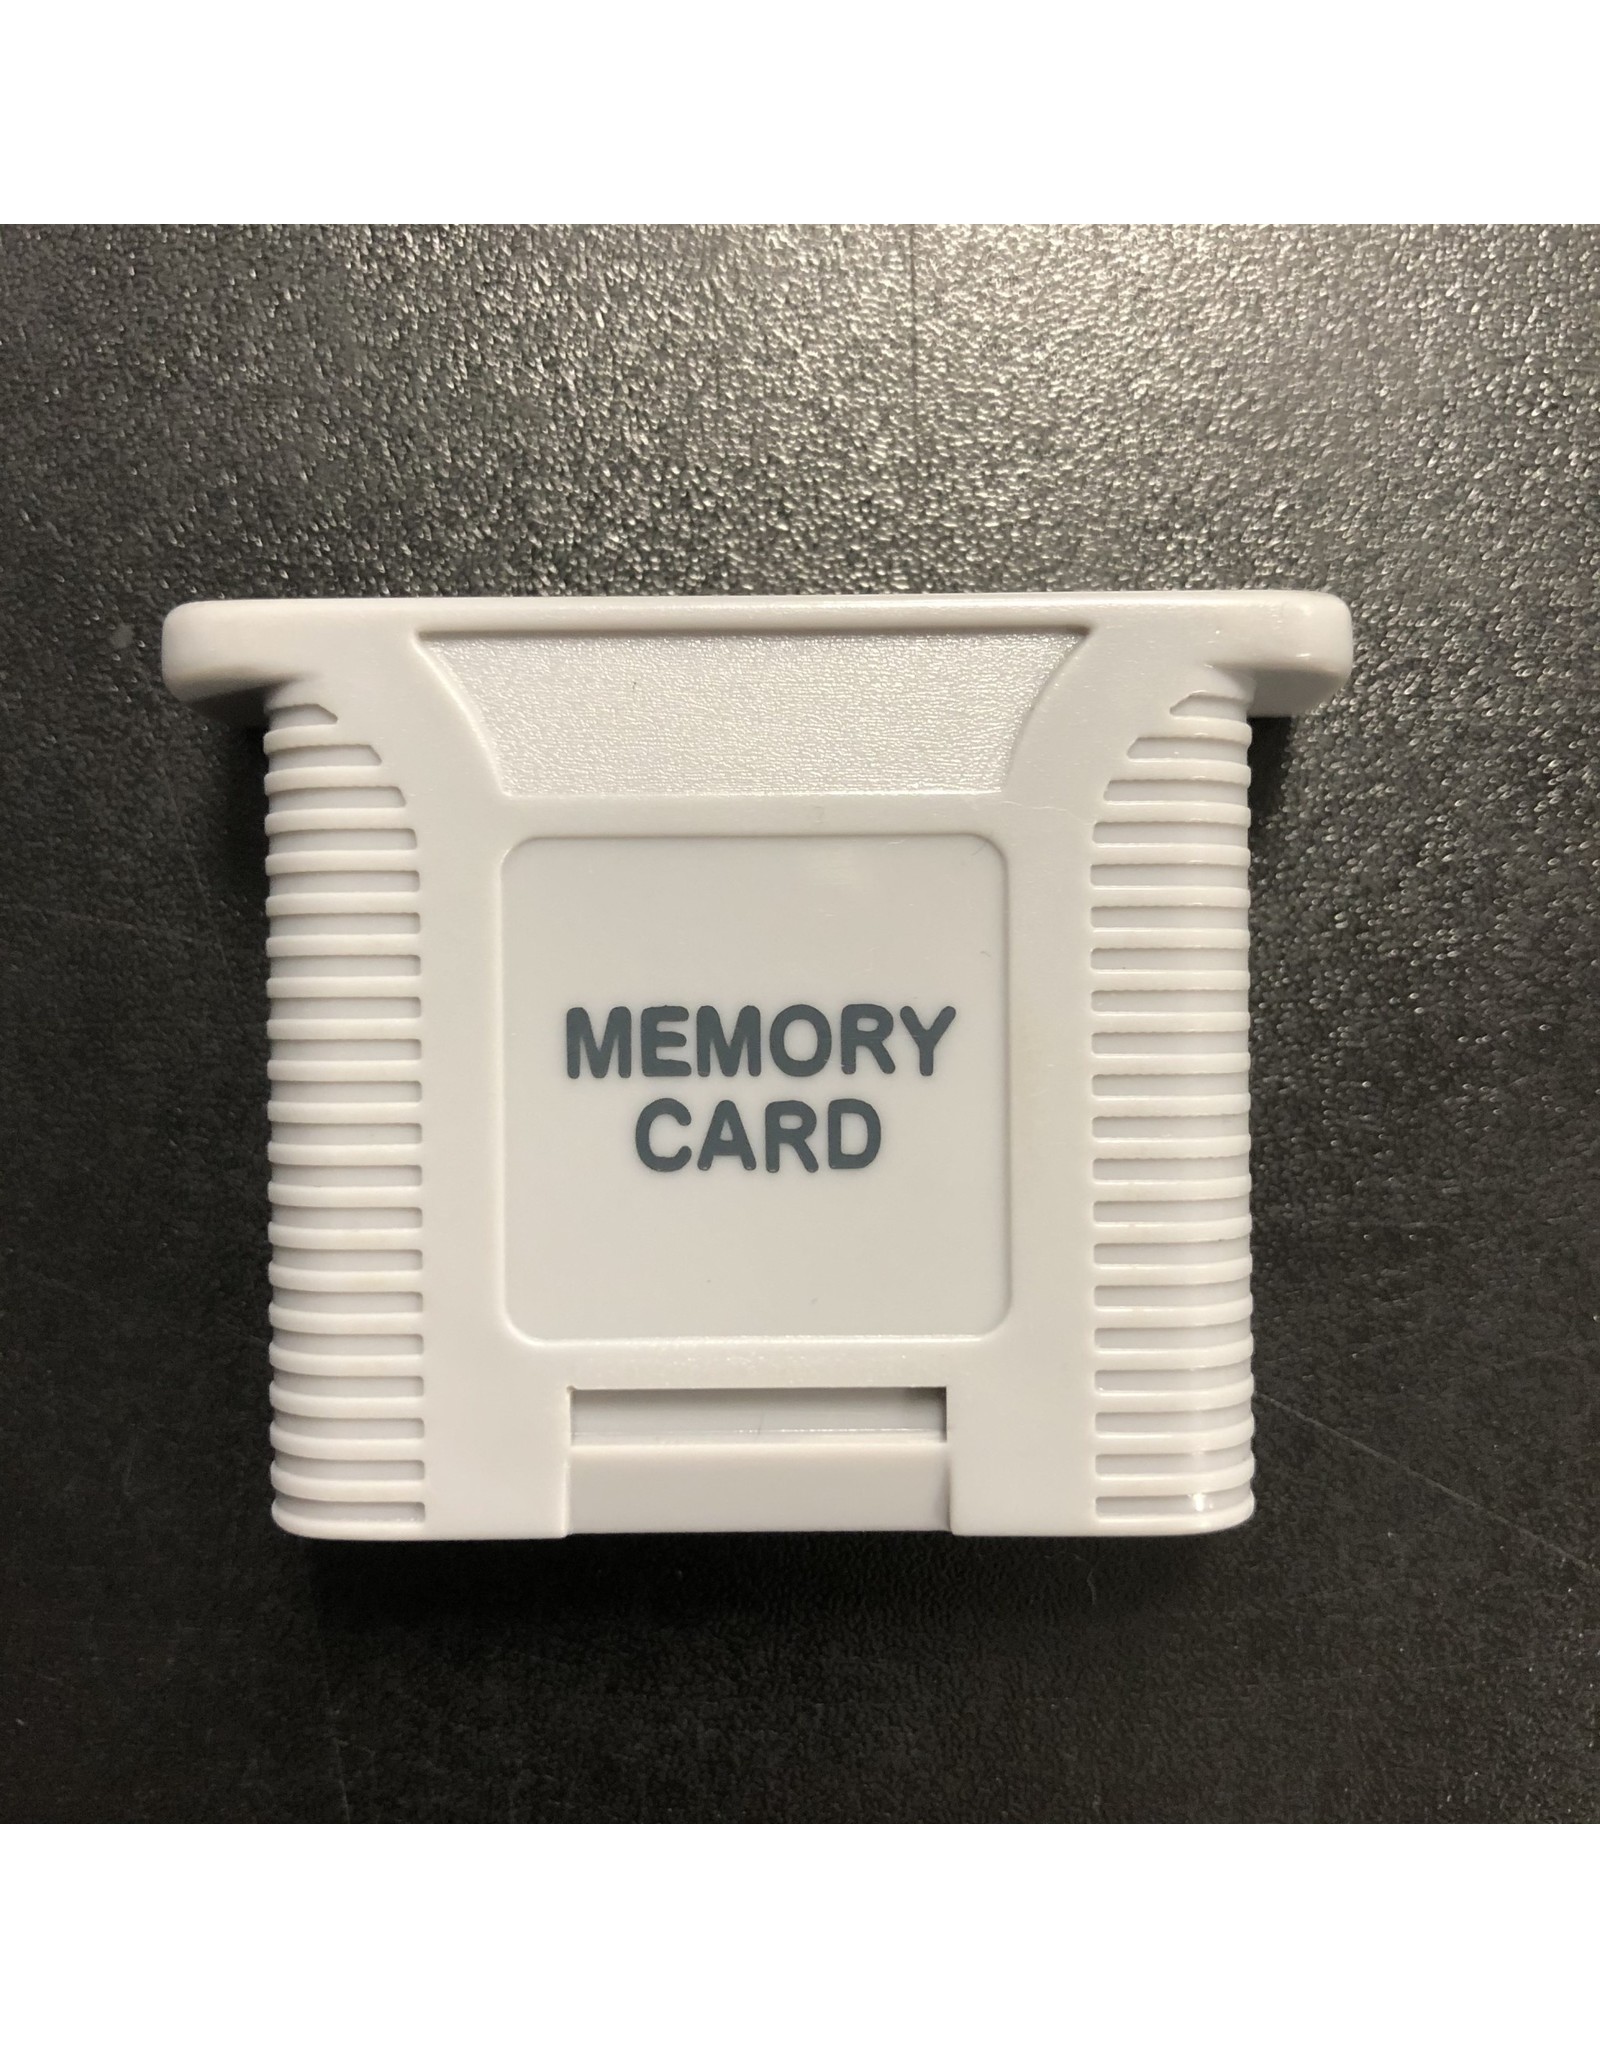 Nintendo 64 N64 Nintendo 64 Memory Card - 3rd Party, Assorted Brands/Colors (Used)